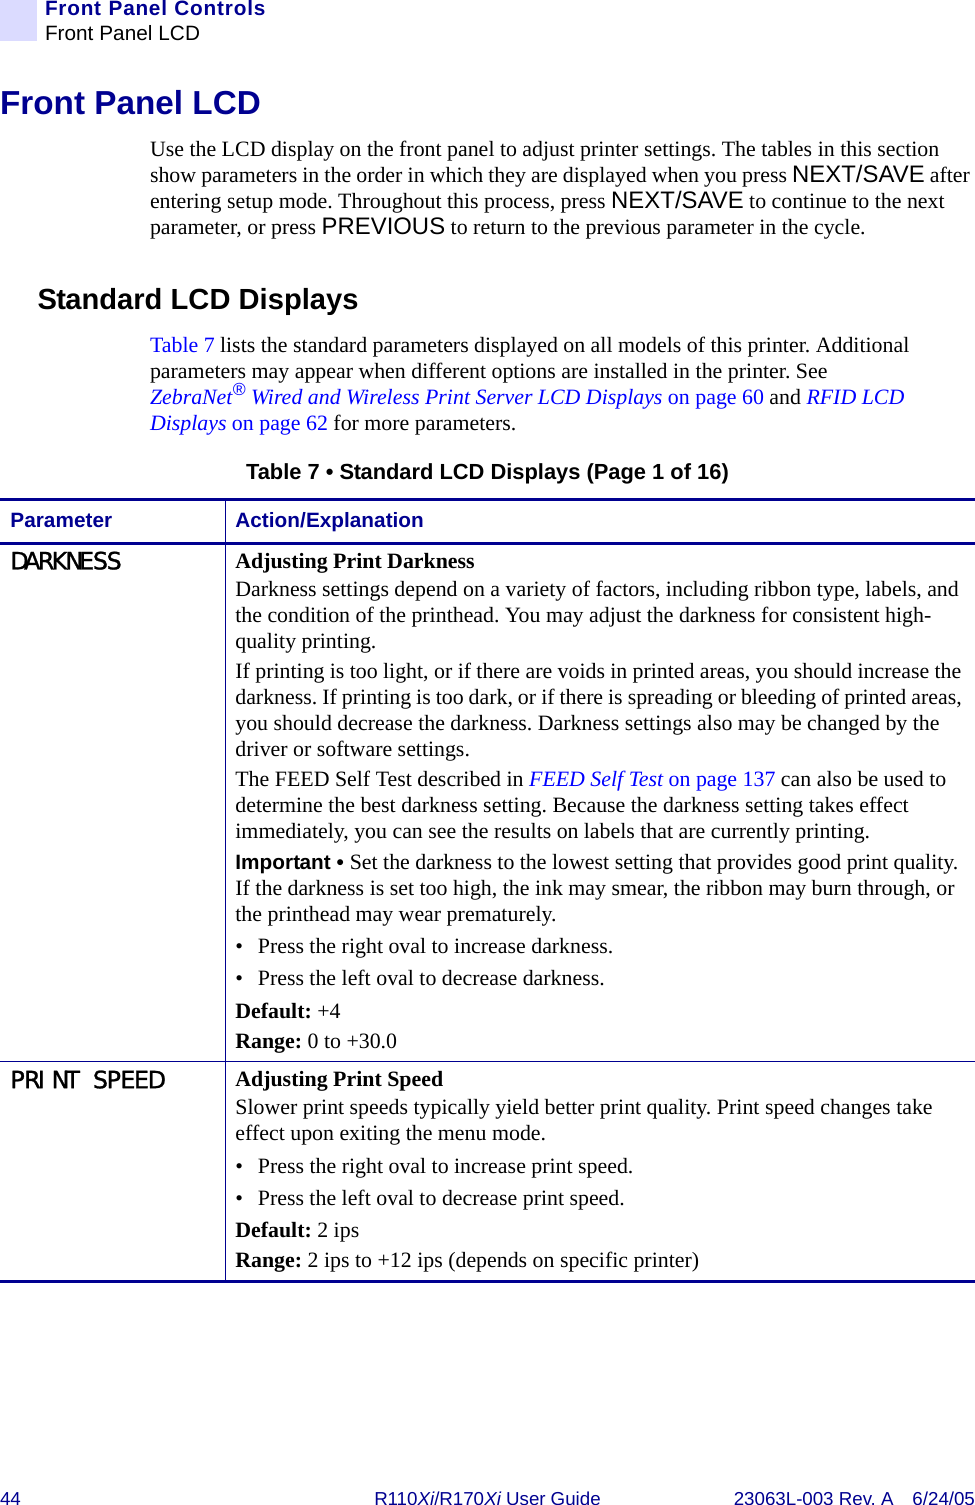 44 R110Xi/R170Xi User Guide 23063L-003 Rev. A 6/24/05Front Panel ControlsFront Panel LCDFront Panel LCDUse the LCD display on the front panel to adjust printer settings. The tables in this section show parameters in the order in which they are displayed when you press NEXT/SAVE after entering setup mode. Throughout this process, press NEXT/SAVE to continue to the next parameter, or press PREVIOUS to return to the previous parameter in the cycle.Standard LCD DisplaysTable 7 lists the standard parameters displayed on all models of this printer. Additional parameters may appear when different options are installed in the printer. See ZebraNet®Wired and Wireless Print Server LCD Displays on page 60 and RFID LCD Displays on page 62 for more parameters.Table 7 • Standard LCD Displays (Page 1 of 16)Parameter Action/ExplanationDARKNESS Adjusting Print DarknessDarkness settings depend on a variety of factors, including ribbon type, labels, and the condition of the printhead. You may adjust the darkness for consistent high-quality printing.If printing is too light, or if there are voids in printed areas, you should increase the darkness. If printing is too dark, or if there is spreading or bleeding of printed areas, you should decrease the darkness. Darkness settings also may be changed by the driver or software settings.The FEED Self Test described in FEED Self Test on page 137 can also be used to determine the best darkness setting. Because the darkness setting takes effect immediately, you can see the results on labels that are currently printing.Important • Set the darkness to the lowest setting that provides good print quality. If the darkness is set too high, the ink may smear, the ribbon may burn through, or the printhead may wear prematurely.• Press the right oval to increase darkness.• Press the left oval to decrease darkness.Default: +4Range: 0 to +30.0PRINT SPEED Adjusting Print SpeedSlower print speeds typically yield better print quality. Print speed changes take effect upon exiting the menu mode.• Press the right oval to increase print speed. • Press the left oval to decrease print speed.Default: 2 ipsRange: 2 ips to +12 ips (depends on specific printer)